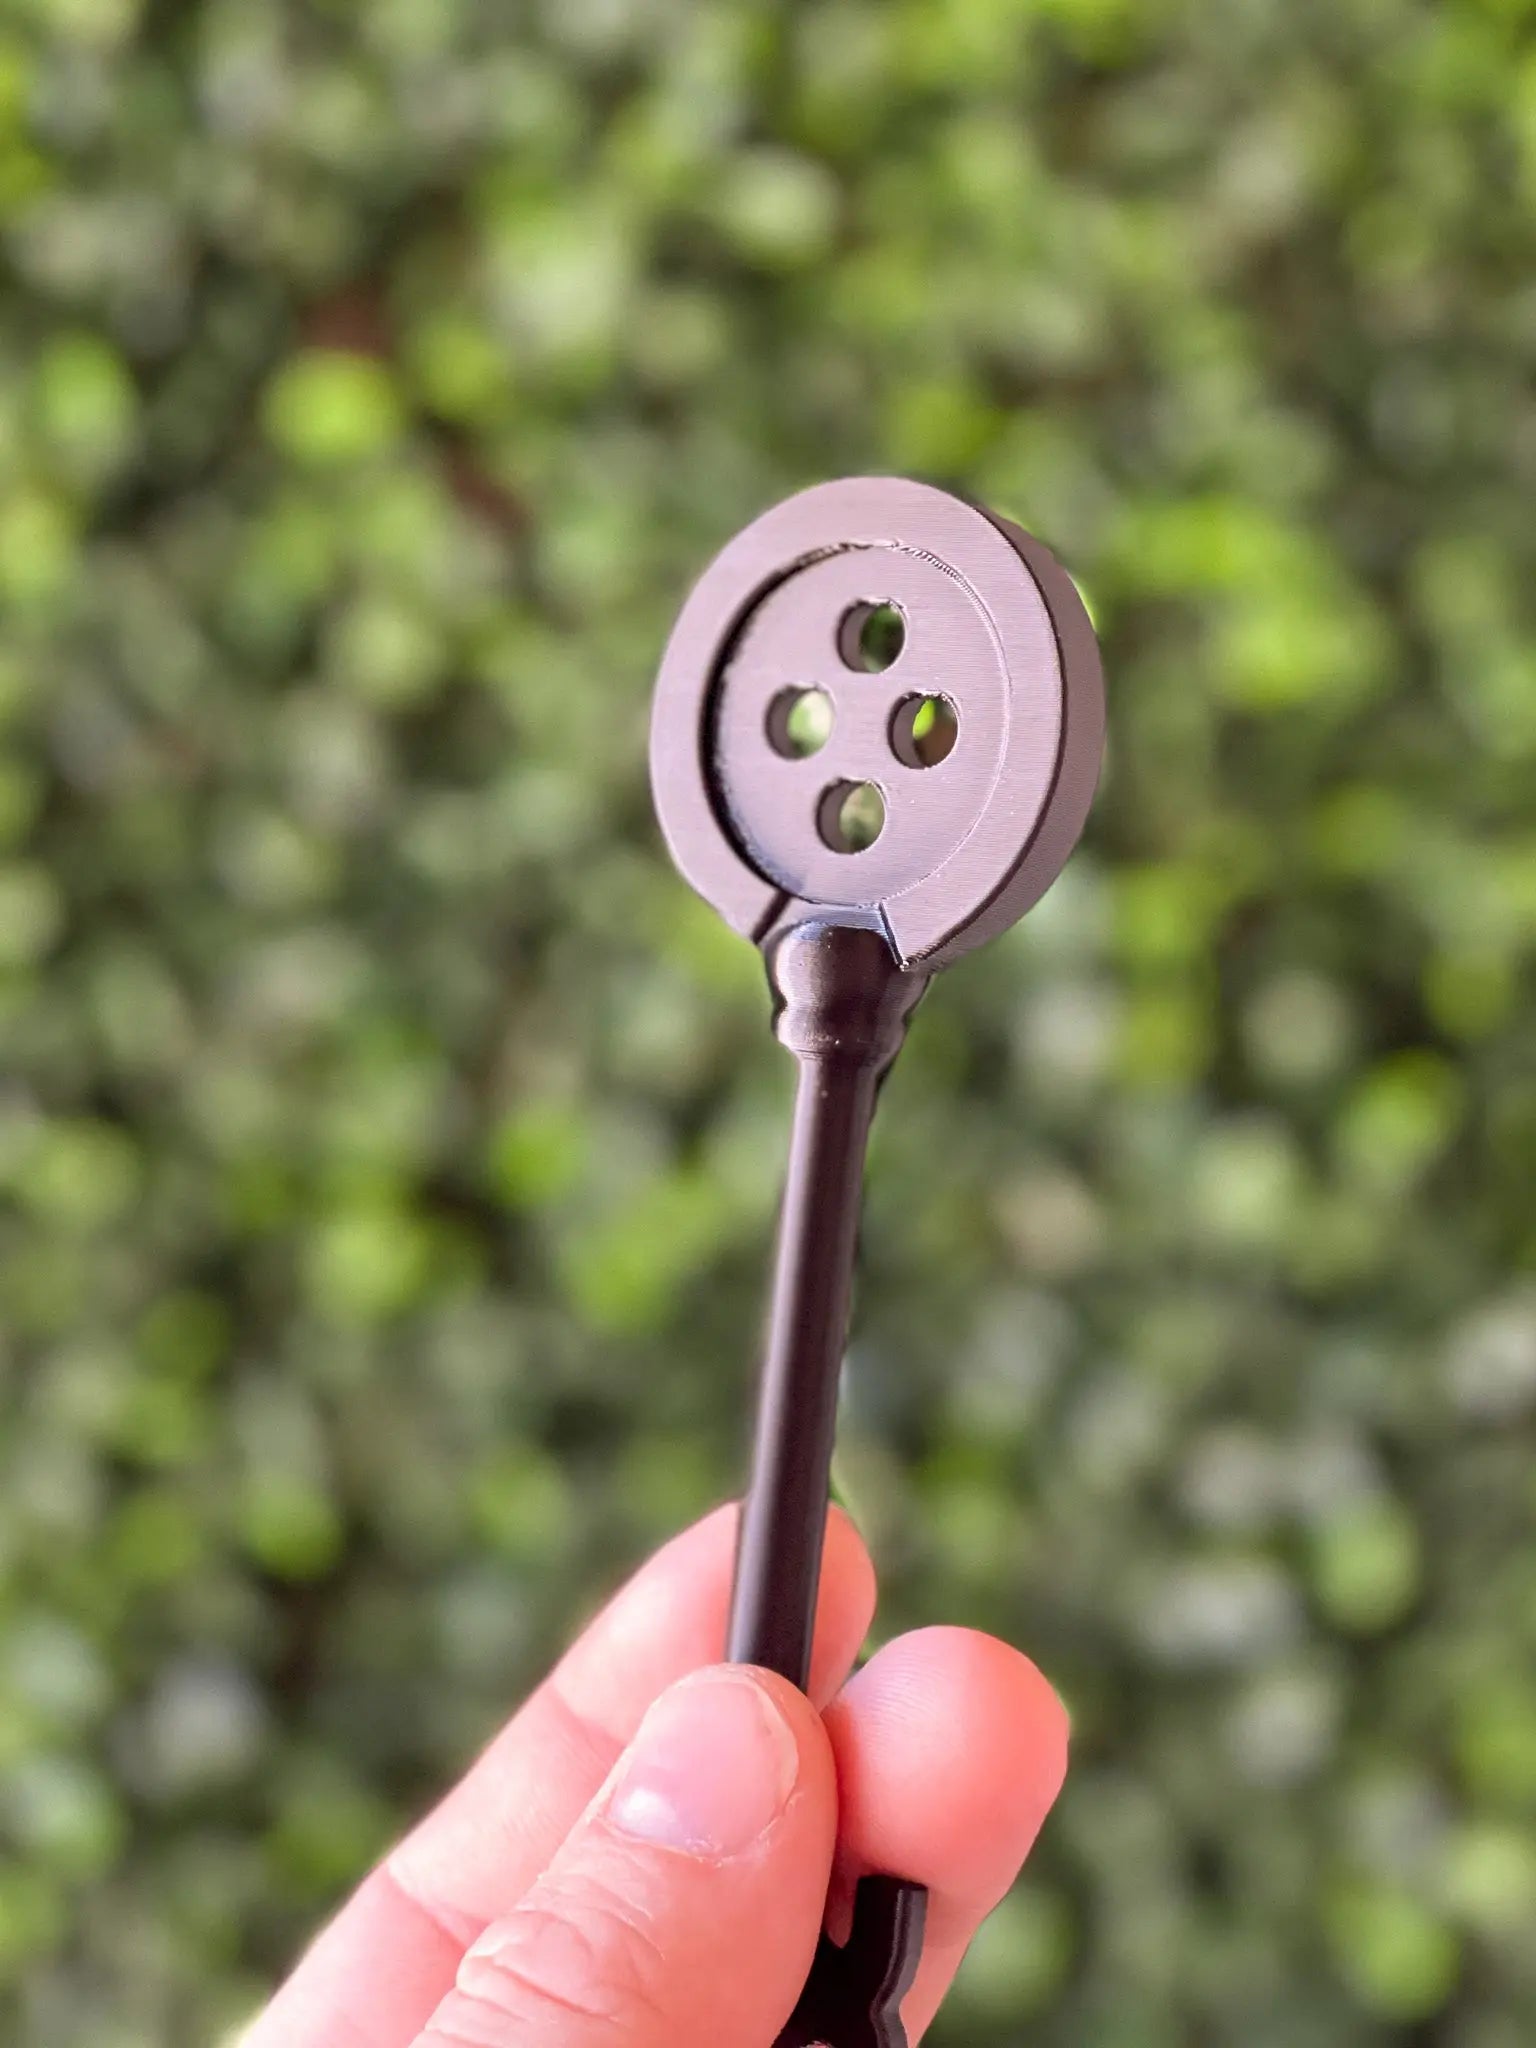 3D Printed Coraline button key prop - 3D Props Play